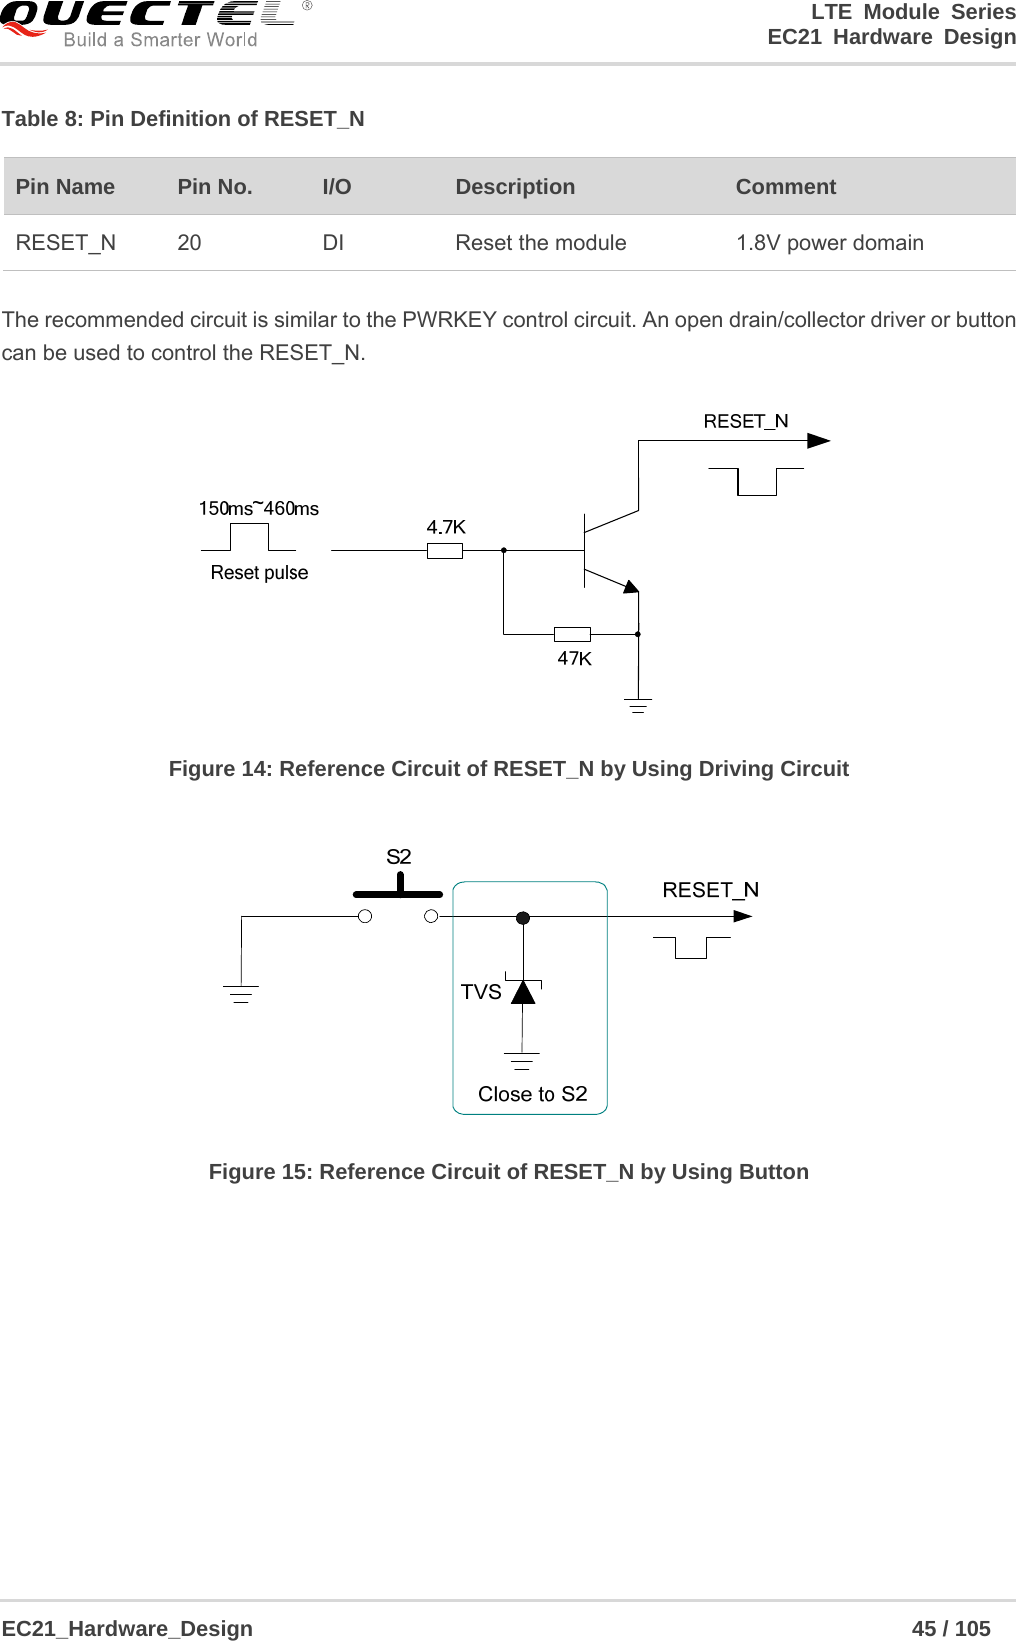                                                                        LTE Module Series                                                                 EC21 Hardware Design  EC21_Hardware_Design                                                            45 / 105    Table 8: Pin Definition of RESET_N  The recommended circuit is similar to the PWRKEY control circuit. An open drain/collector driver or button can be used to control the RESET_N.  Figure 14: Reference Circuit of RESET_N by Using Driving Circuit   Figure 15: Reference Circuit of RESET_N by Using Button           Pin Name    Pin No.  I/O  Description  Comment RESET_N  20  DI  Reset the module  1.8V power domain 